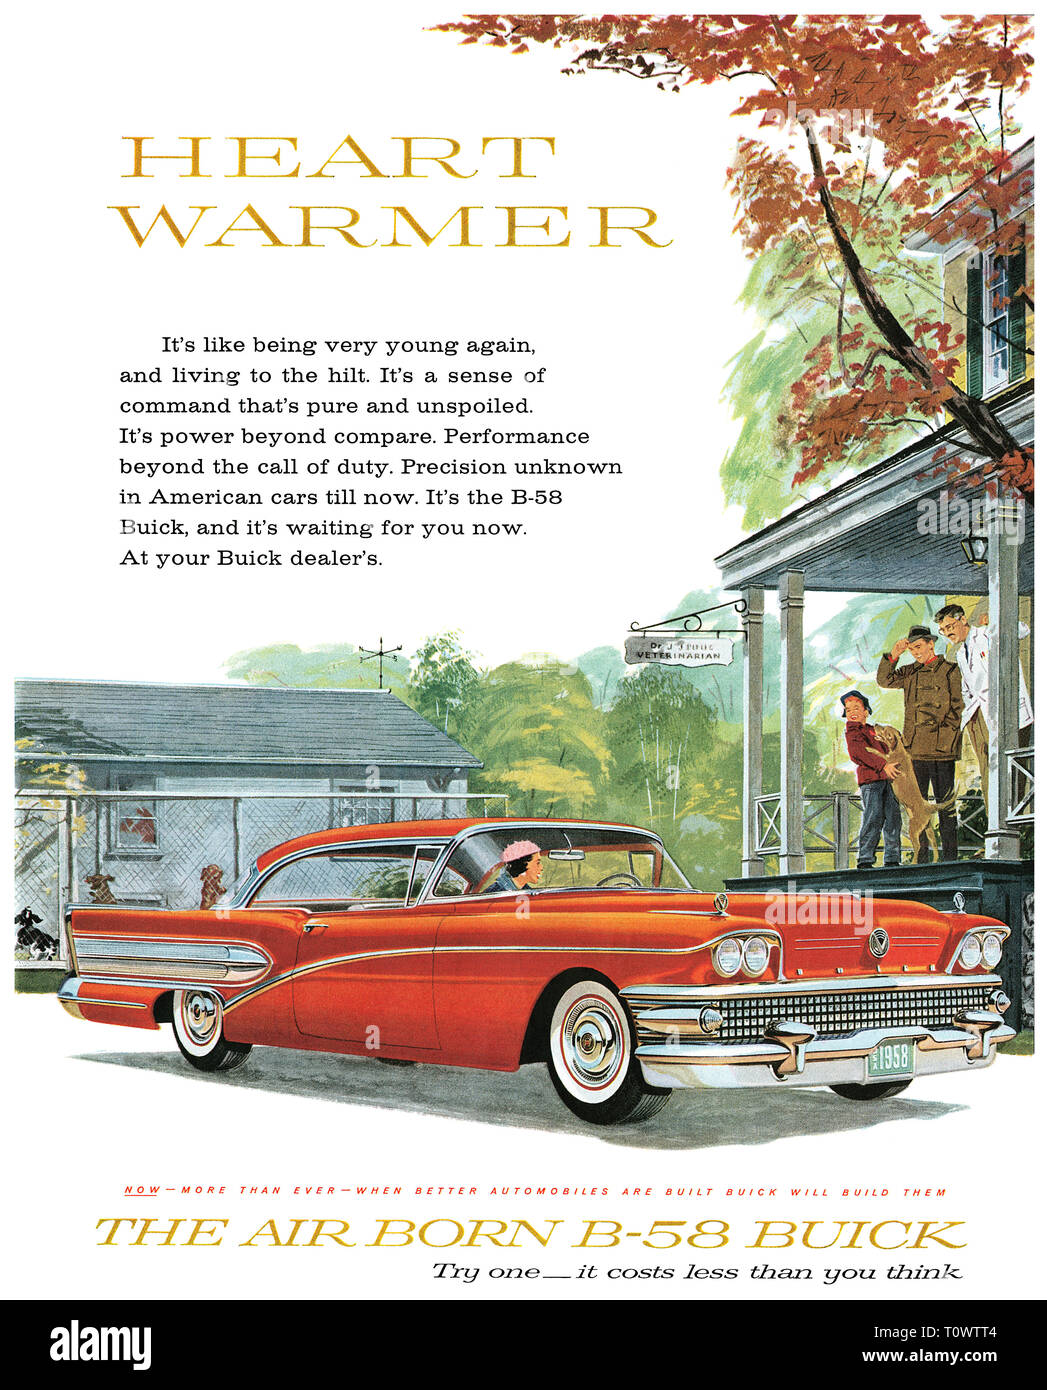 1958 U.S. advertisement for the B-58 Buick automobile. Stock Photo